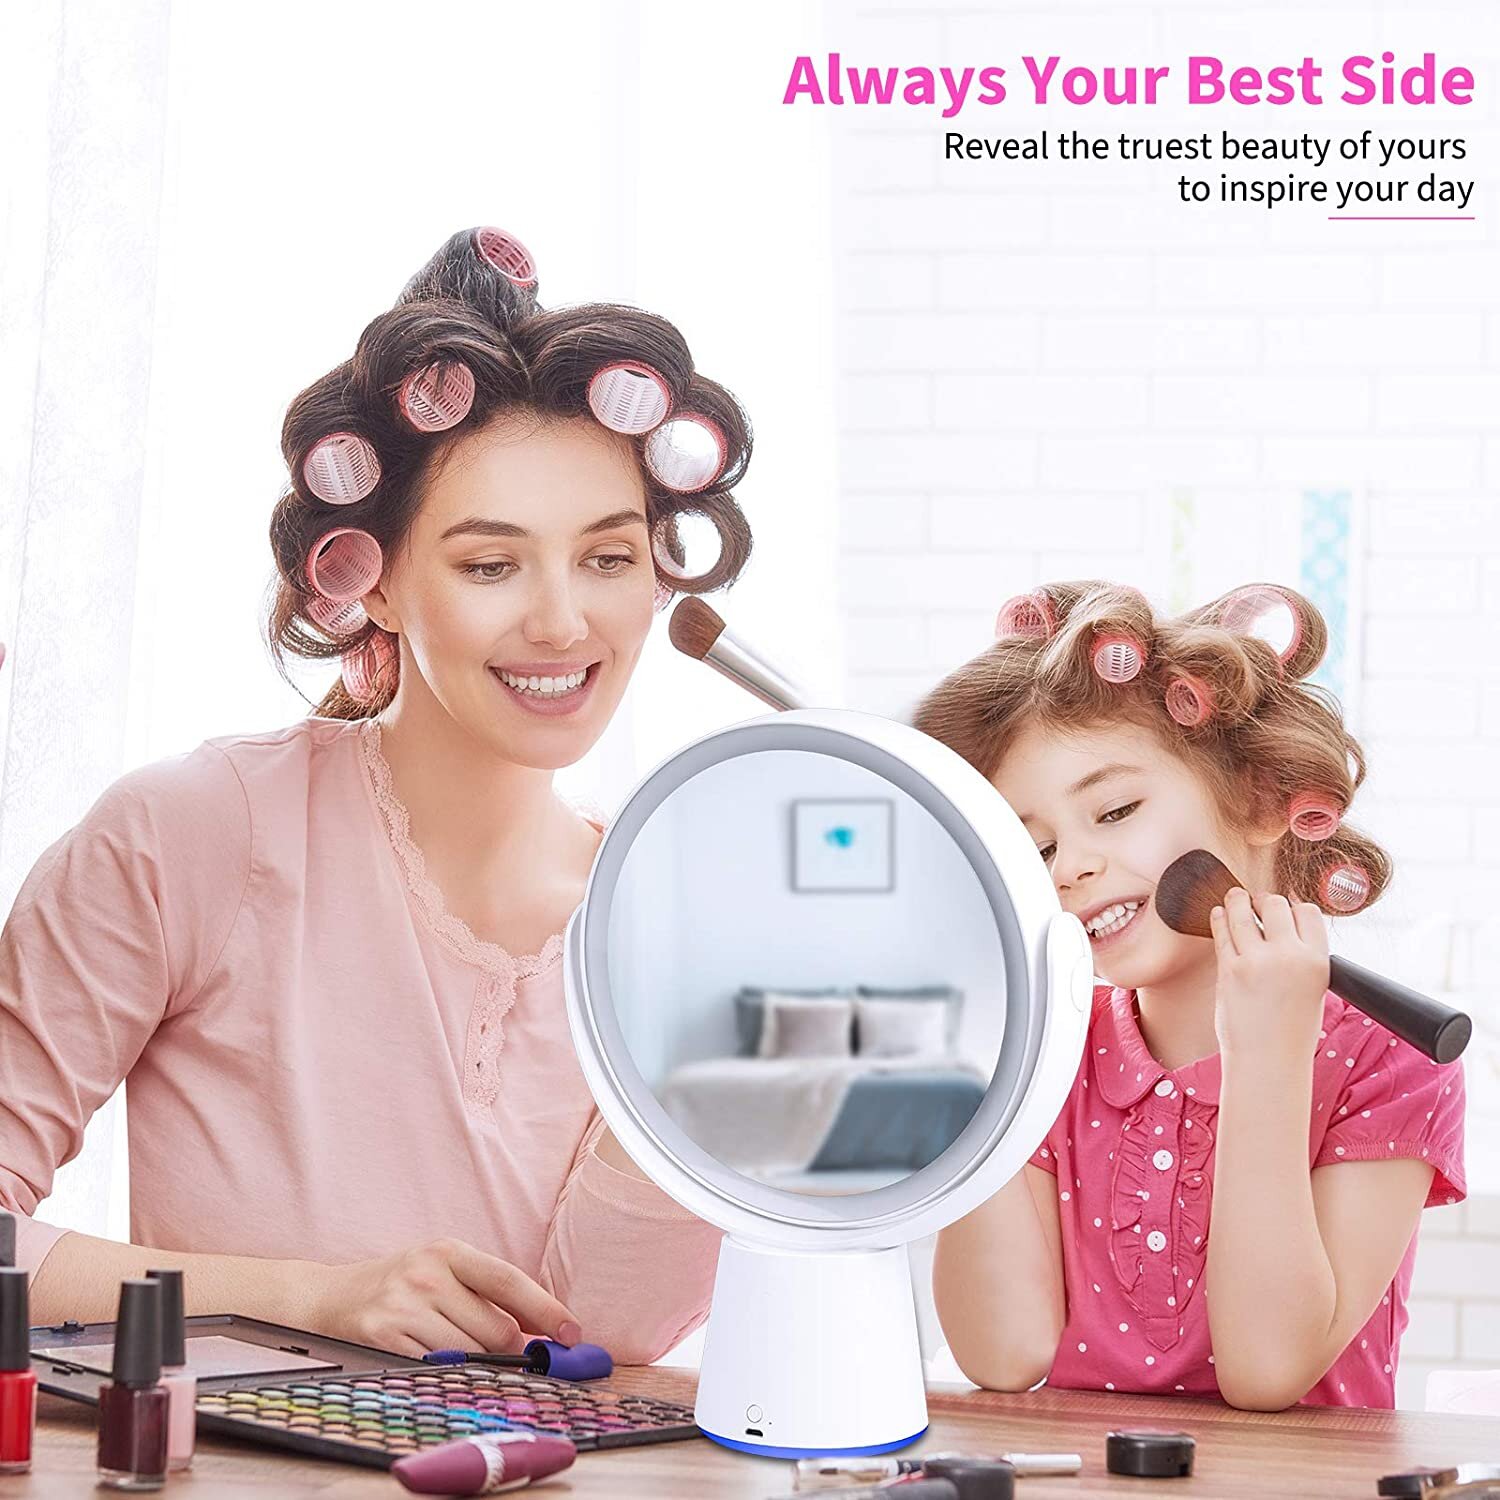 8'' Wall Mounted Makeup Mirror Black USB Rechargeable Double Sided with 3 Tones LED Lights 1x/10x Magnifying Bathroom Mirror for Shaving Extendable Arm Touch Control1X/10X 